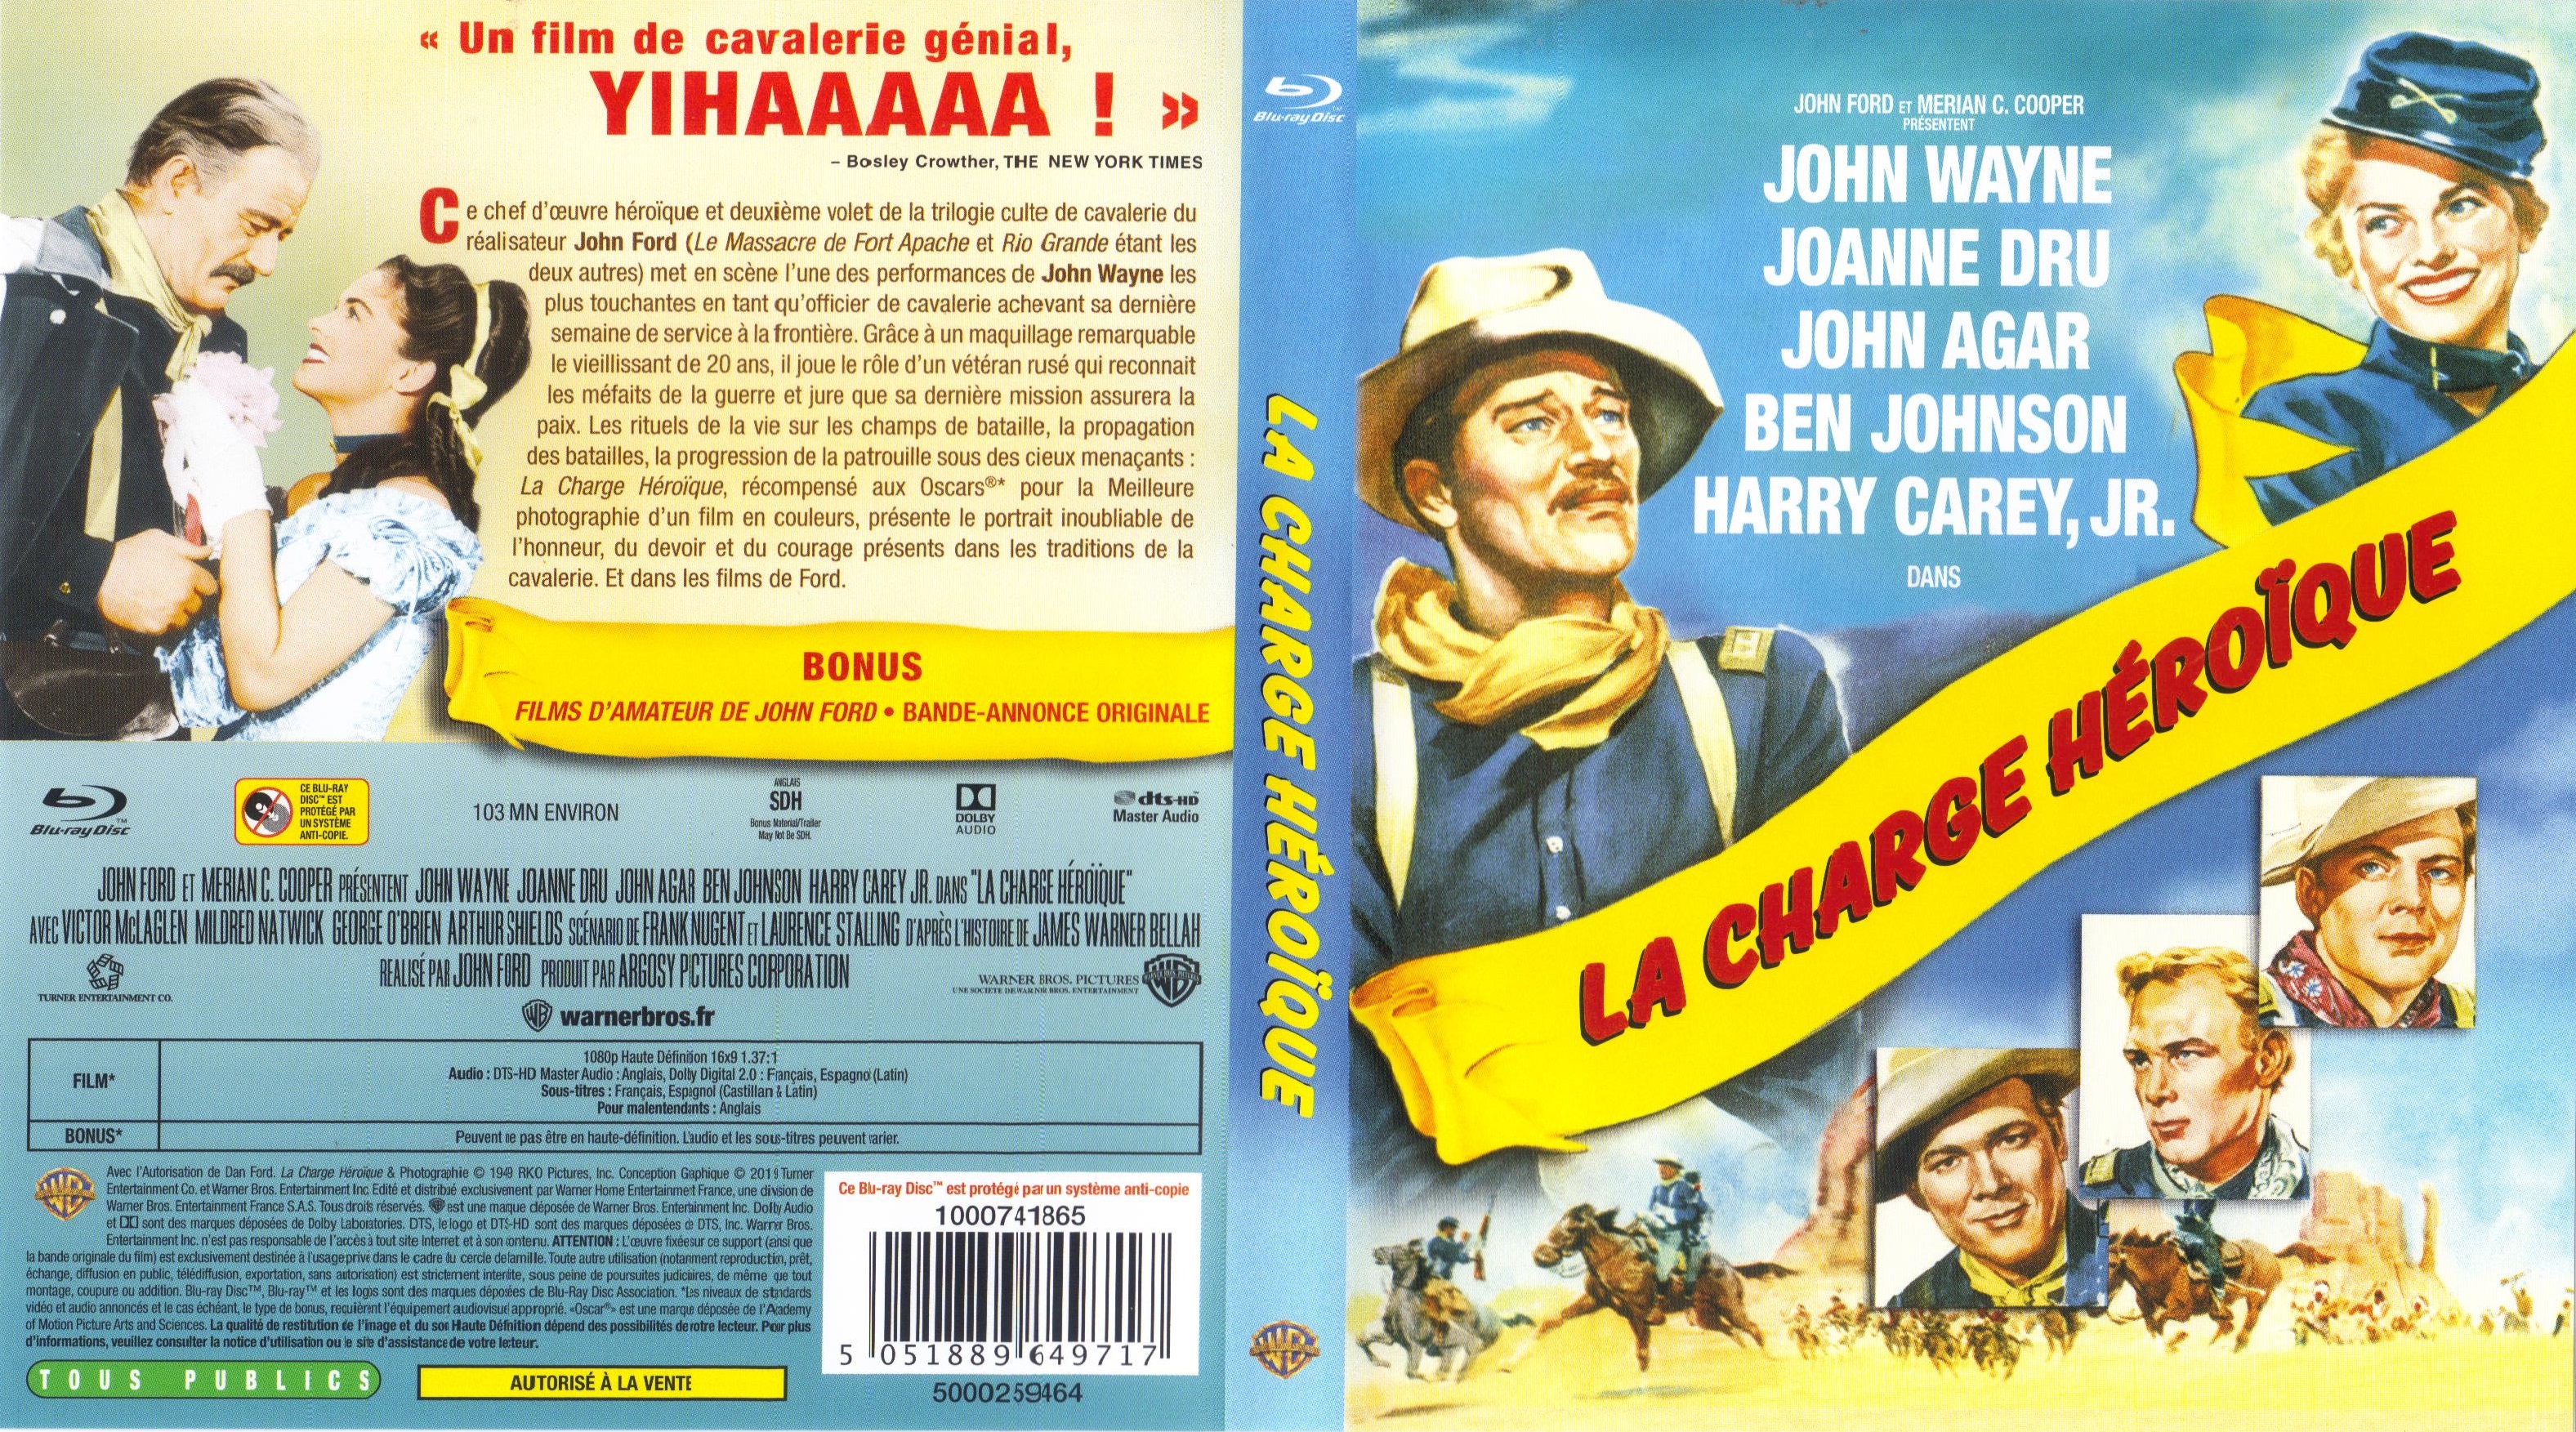 Jaquette DVD La Charge hroique (BLU-RAY)